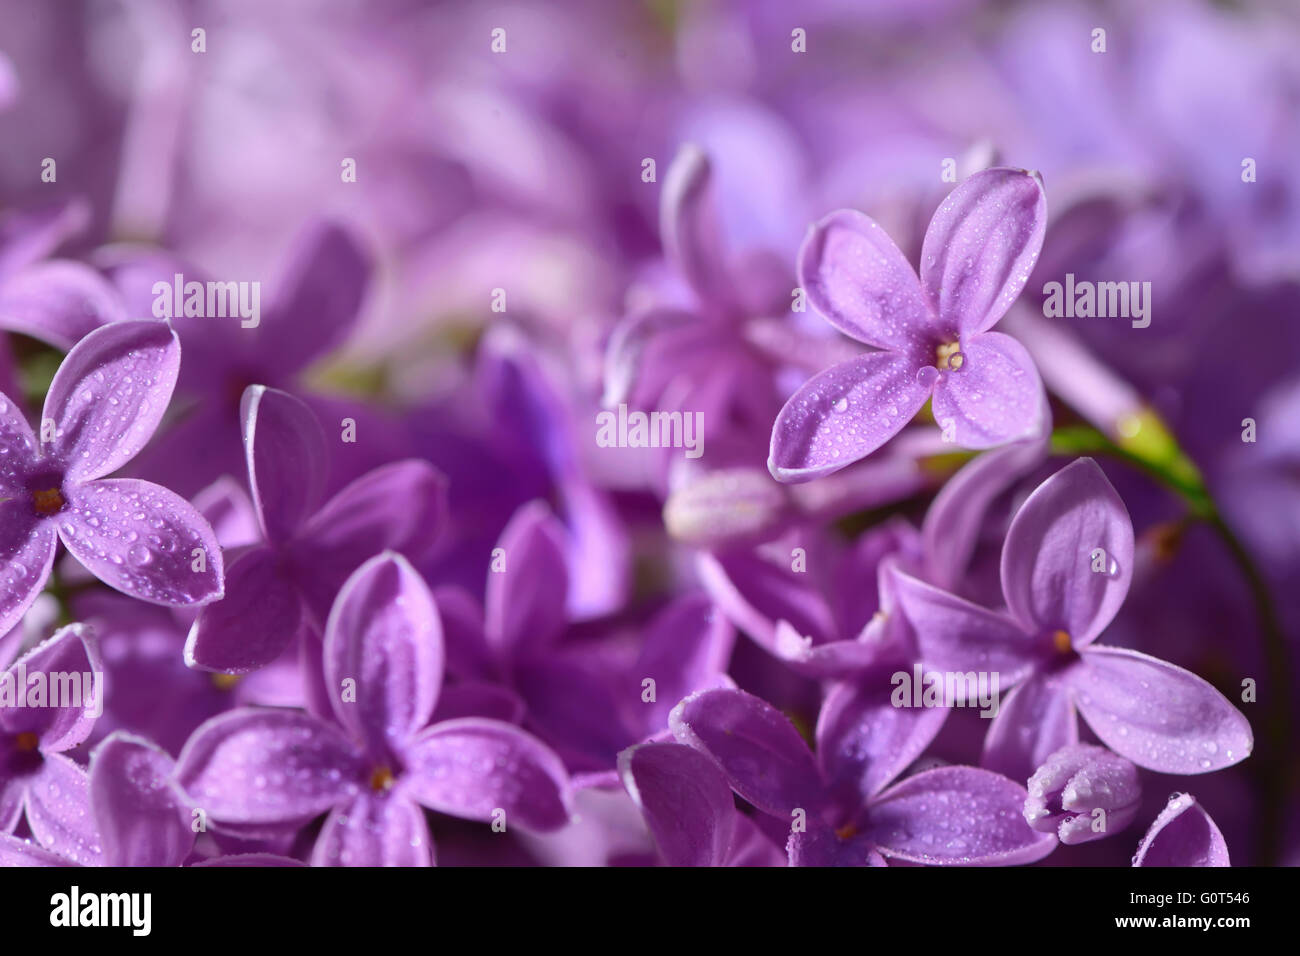 Macro image of spring lilac violet flowers Stock Photo